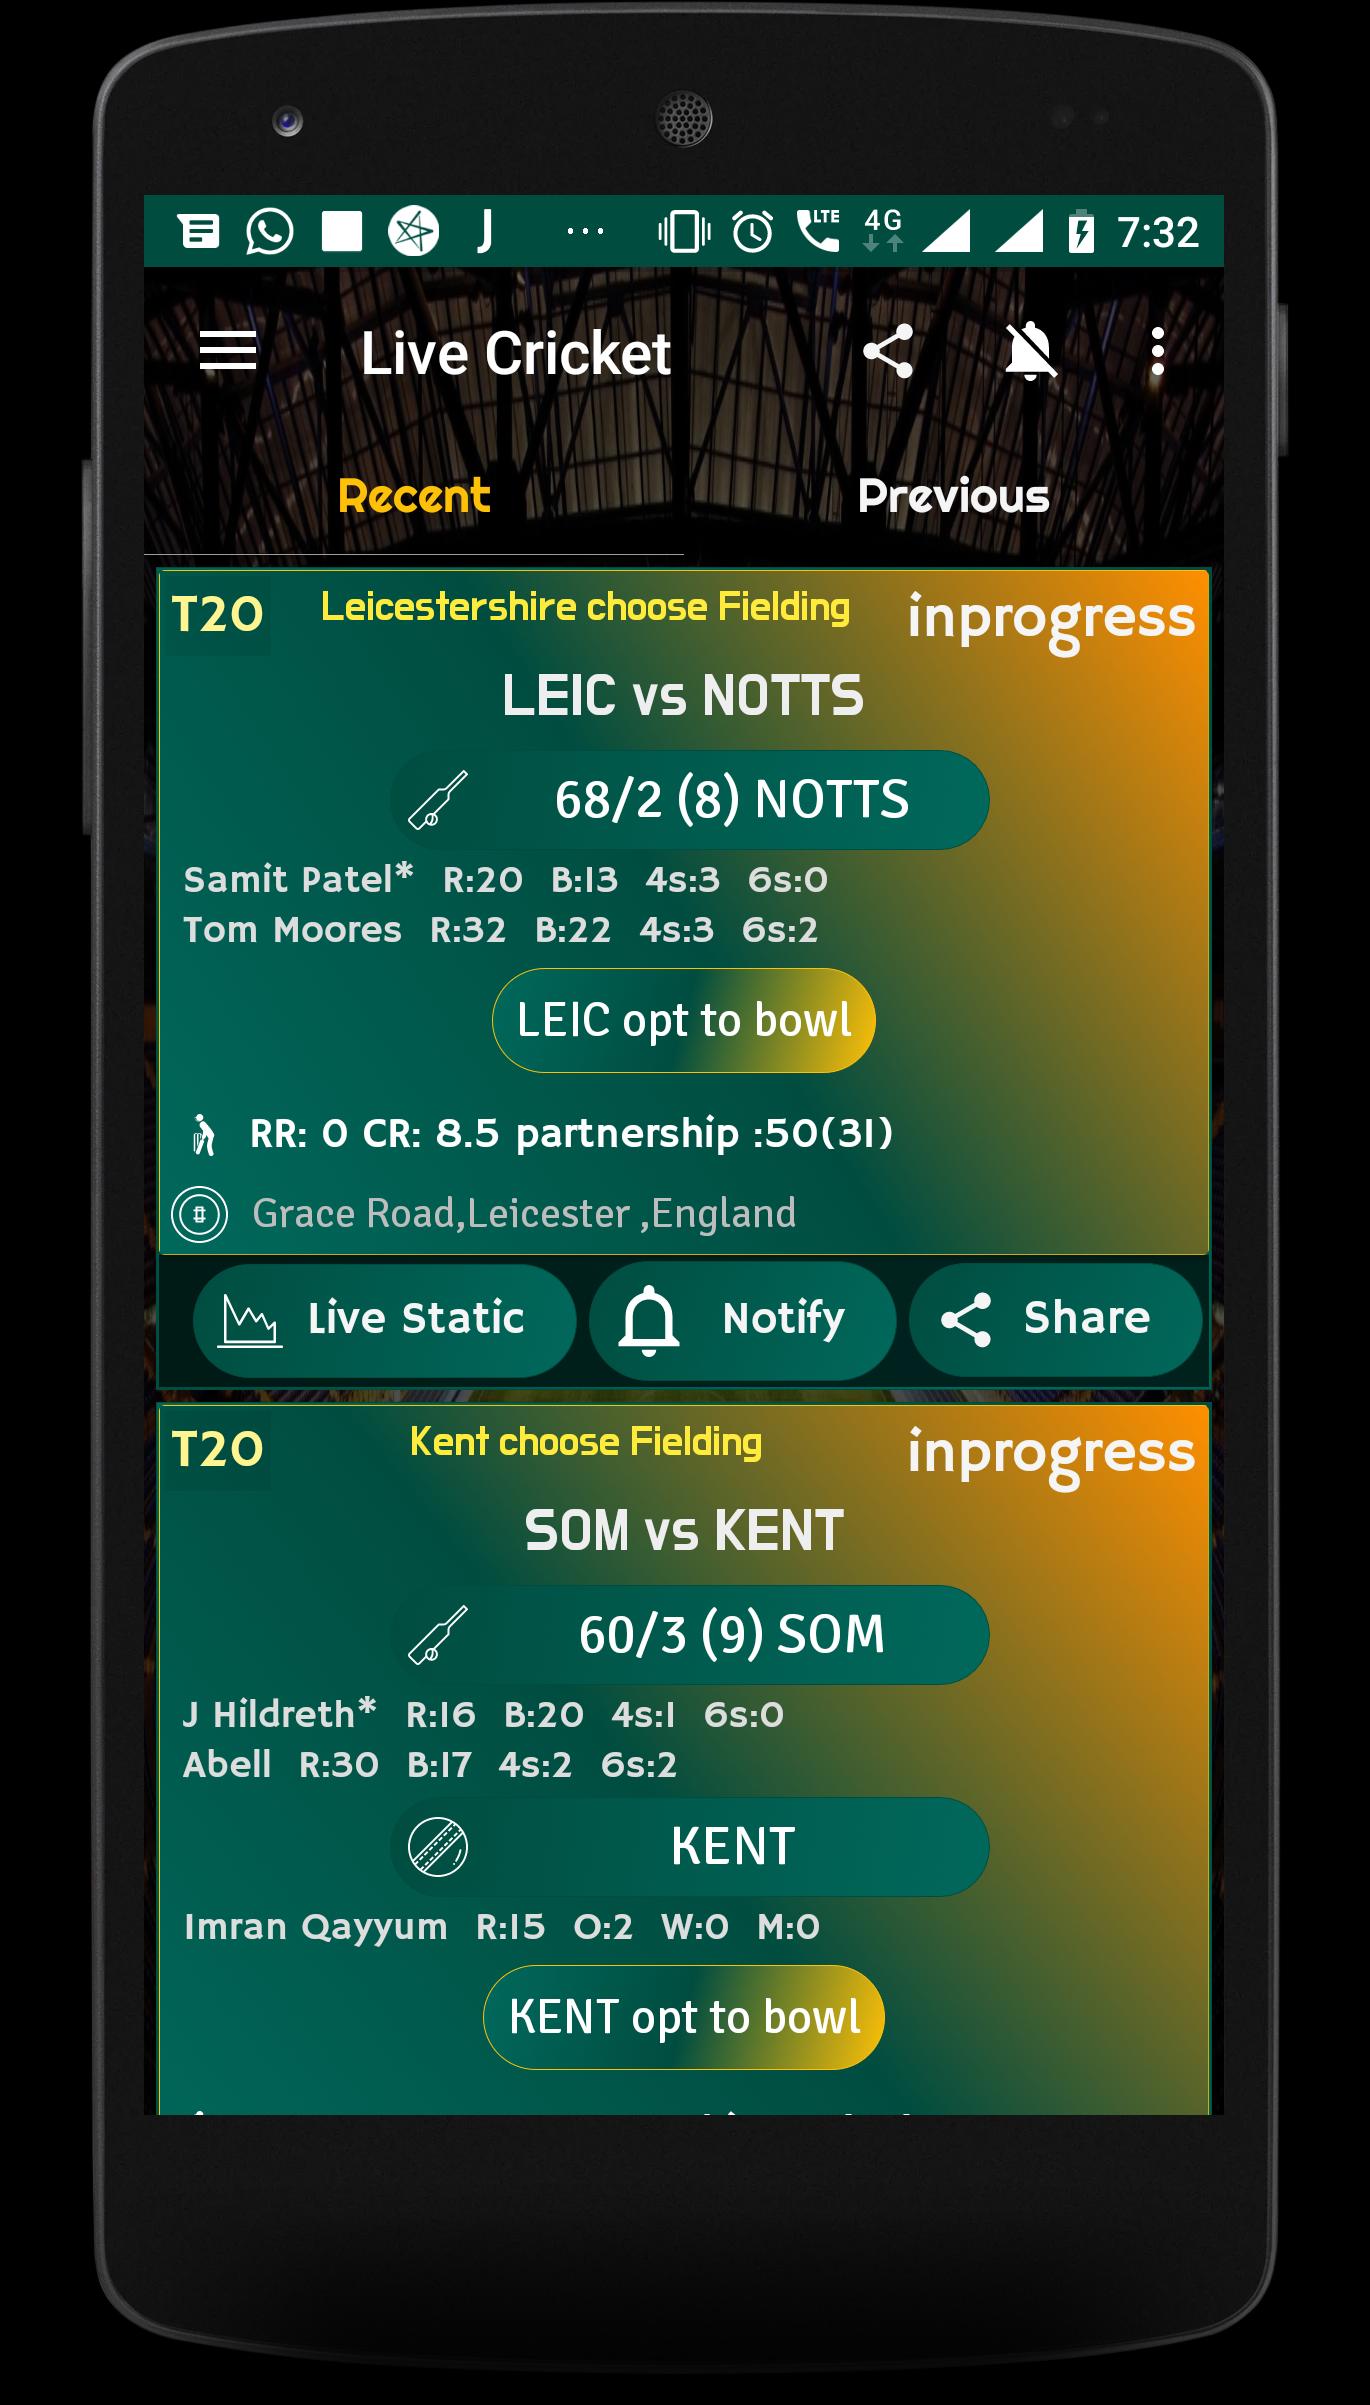 Live Cricket for Android - APK Download